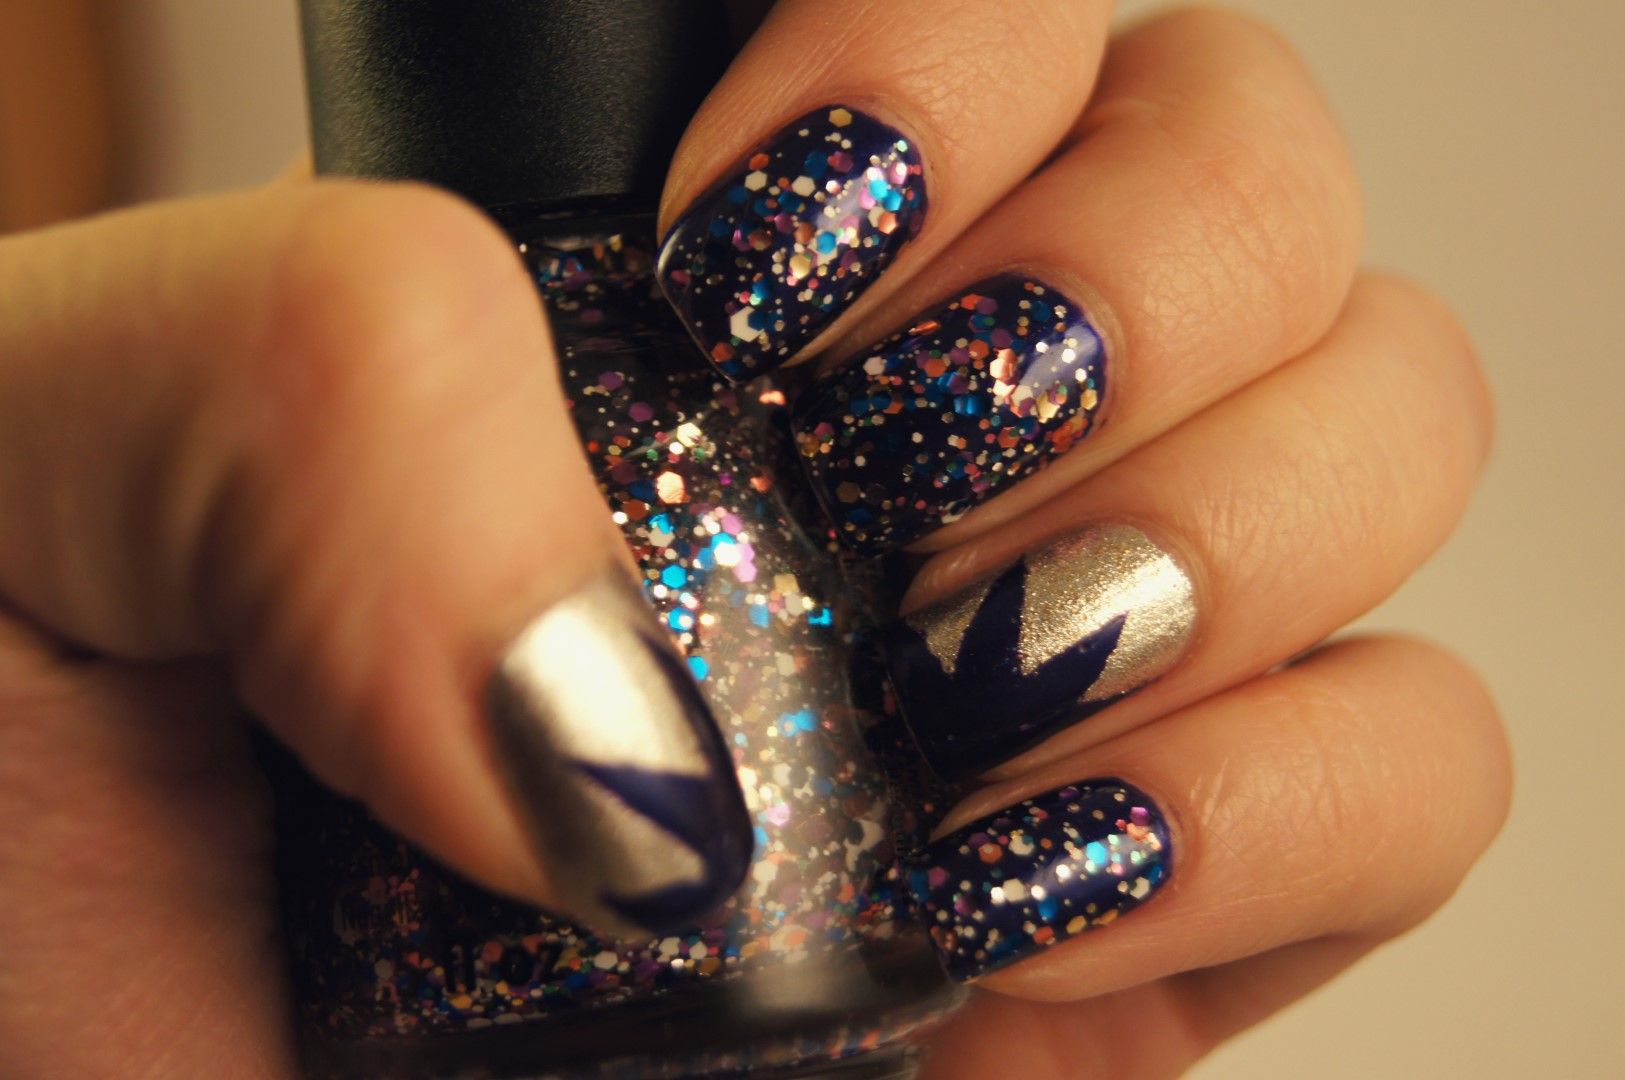 10. Glittery Nail Colors That Will Make Your Nails Pop - wide 1